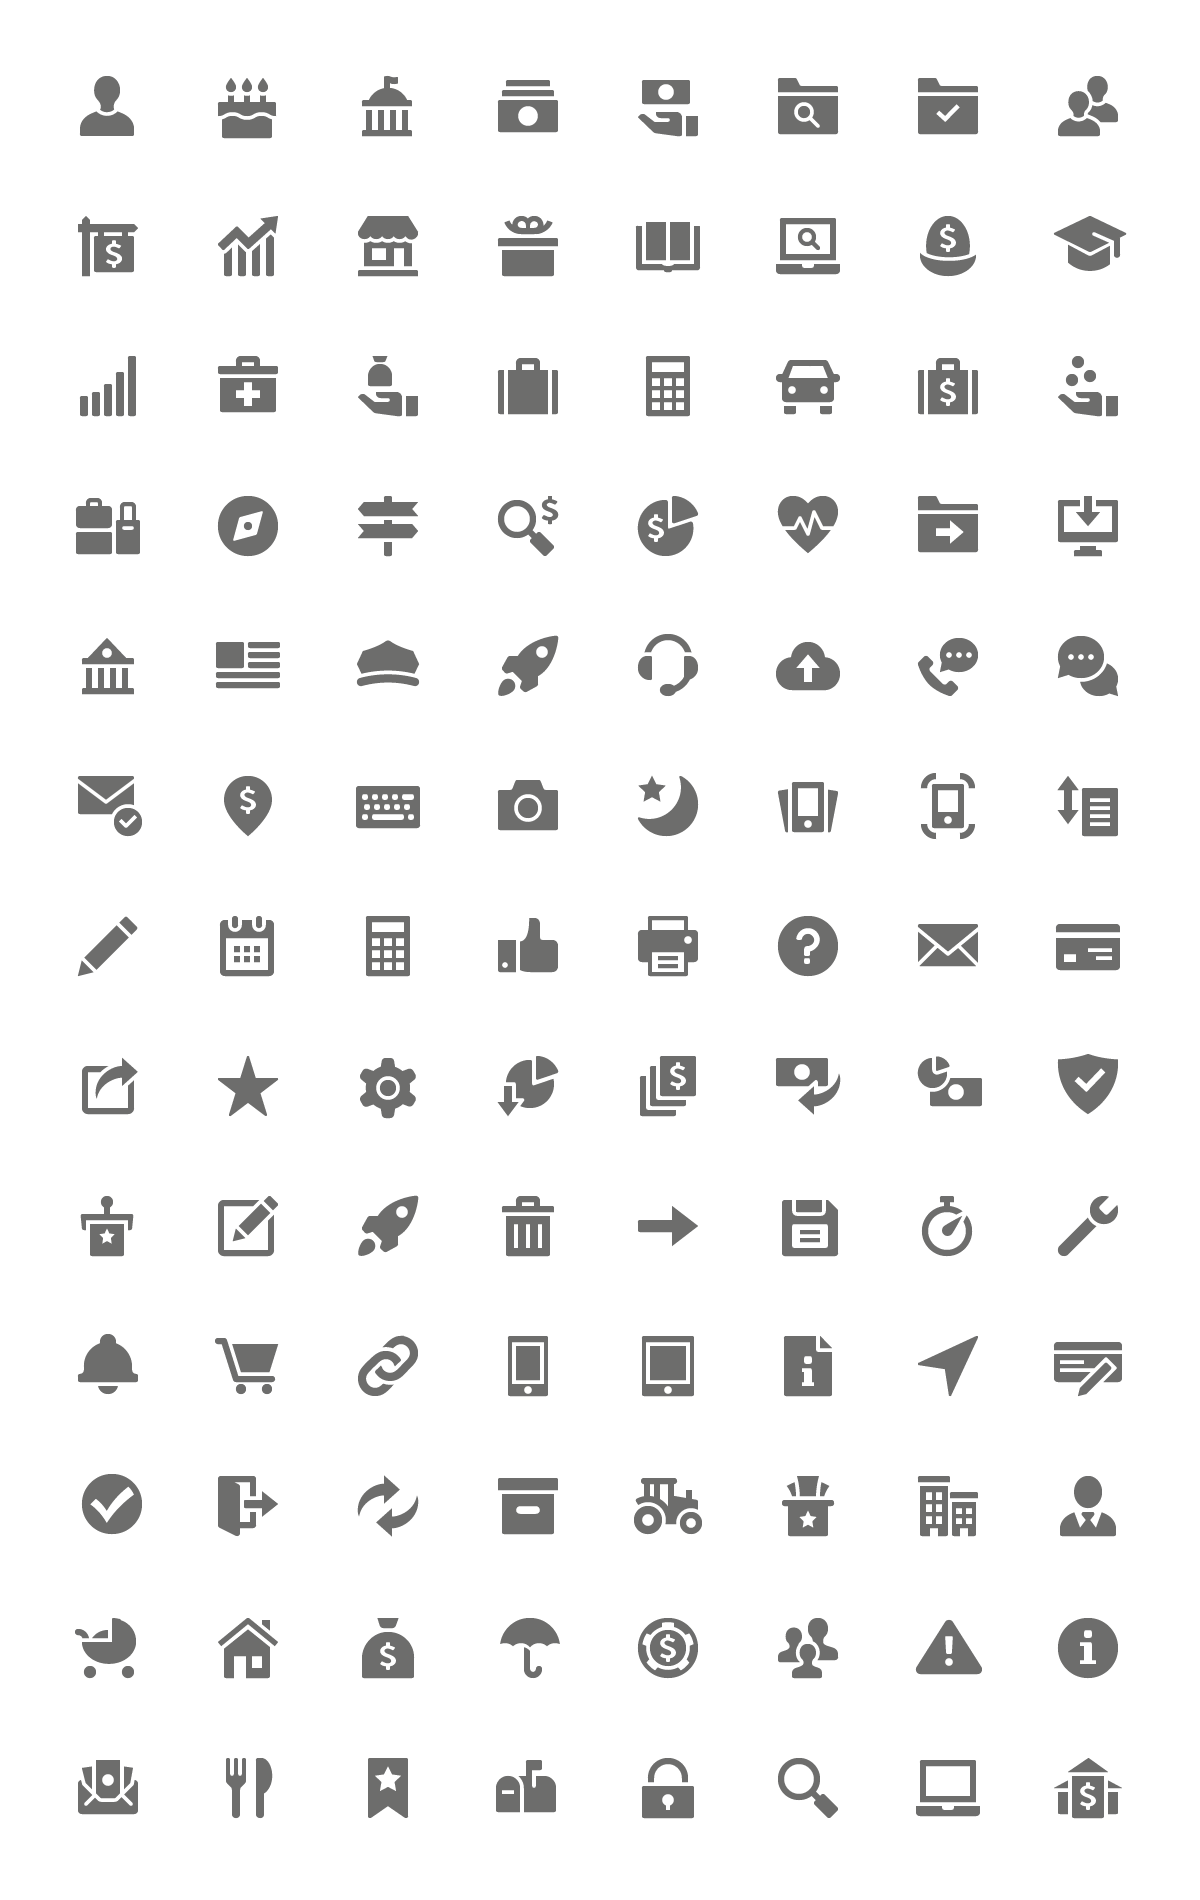 turbotax icons iconography icon set brand Style flat shadow modern Guide guidelines set consistent professional